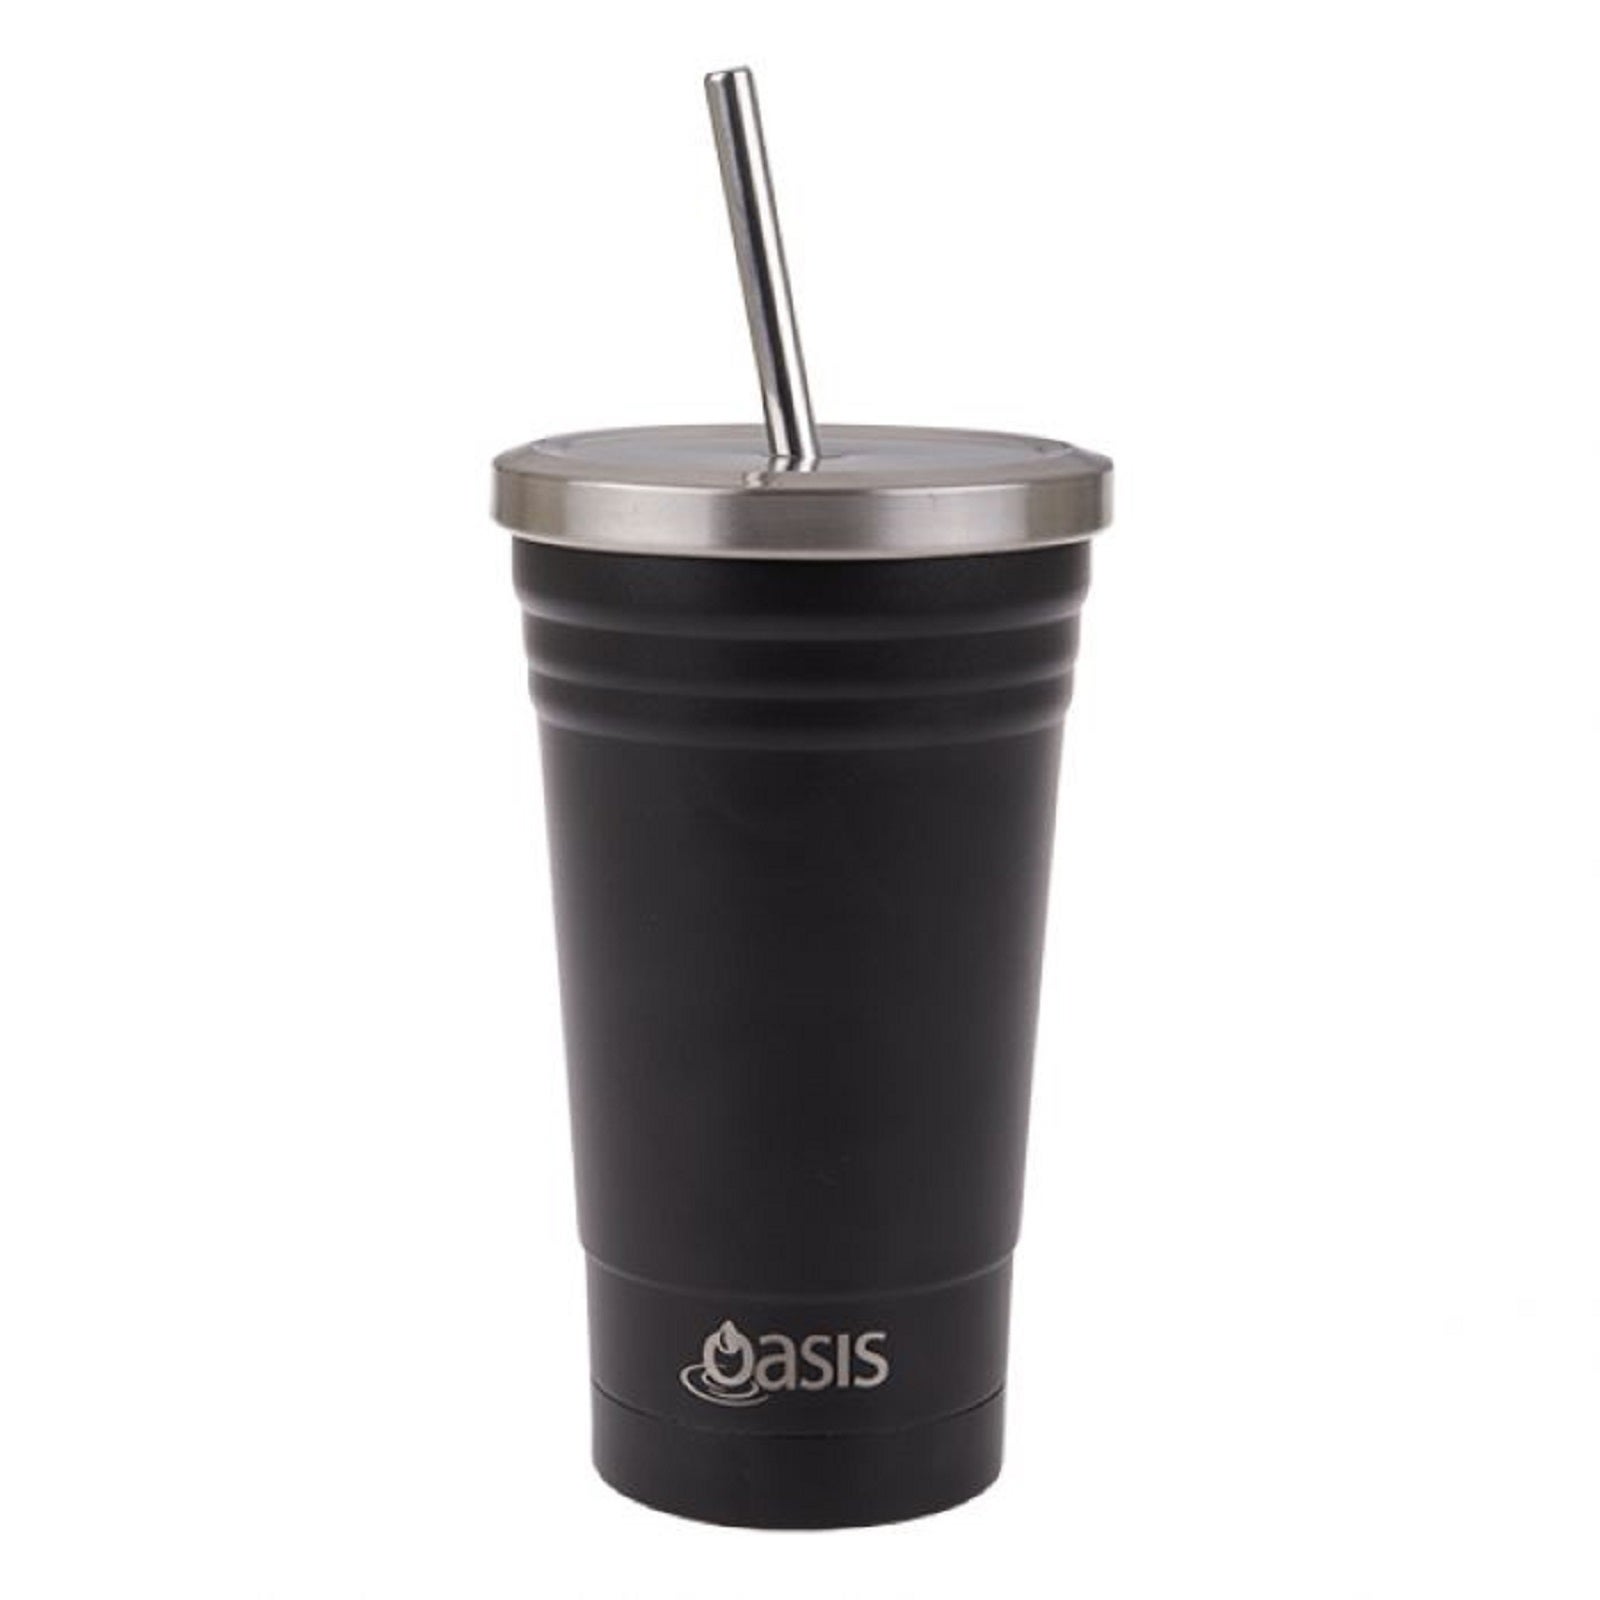 Oasis 500ml Stainless Steel Smoothie Tumbler with Straw